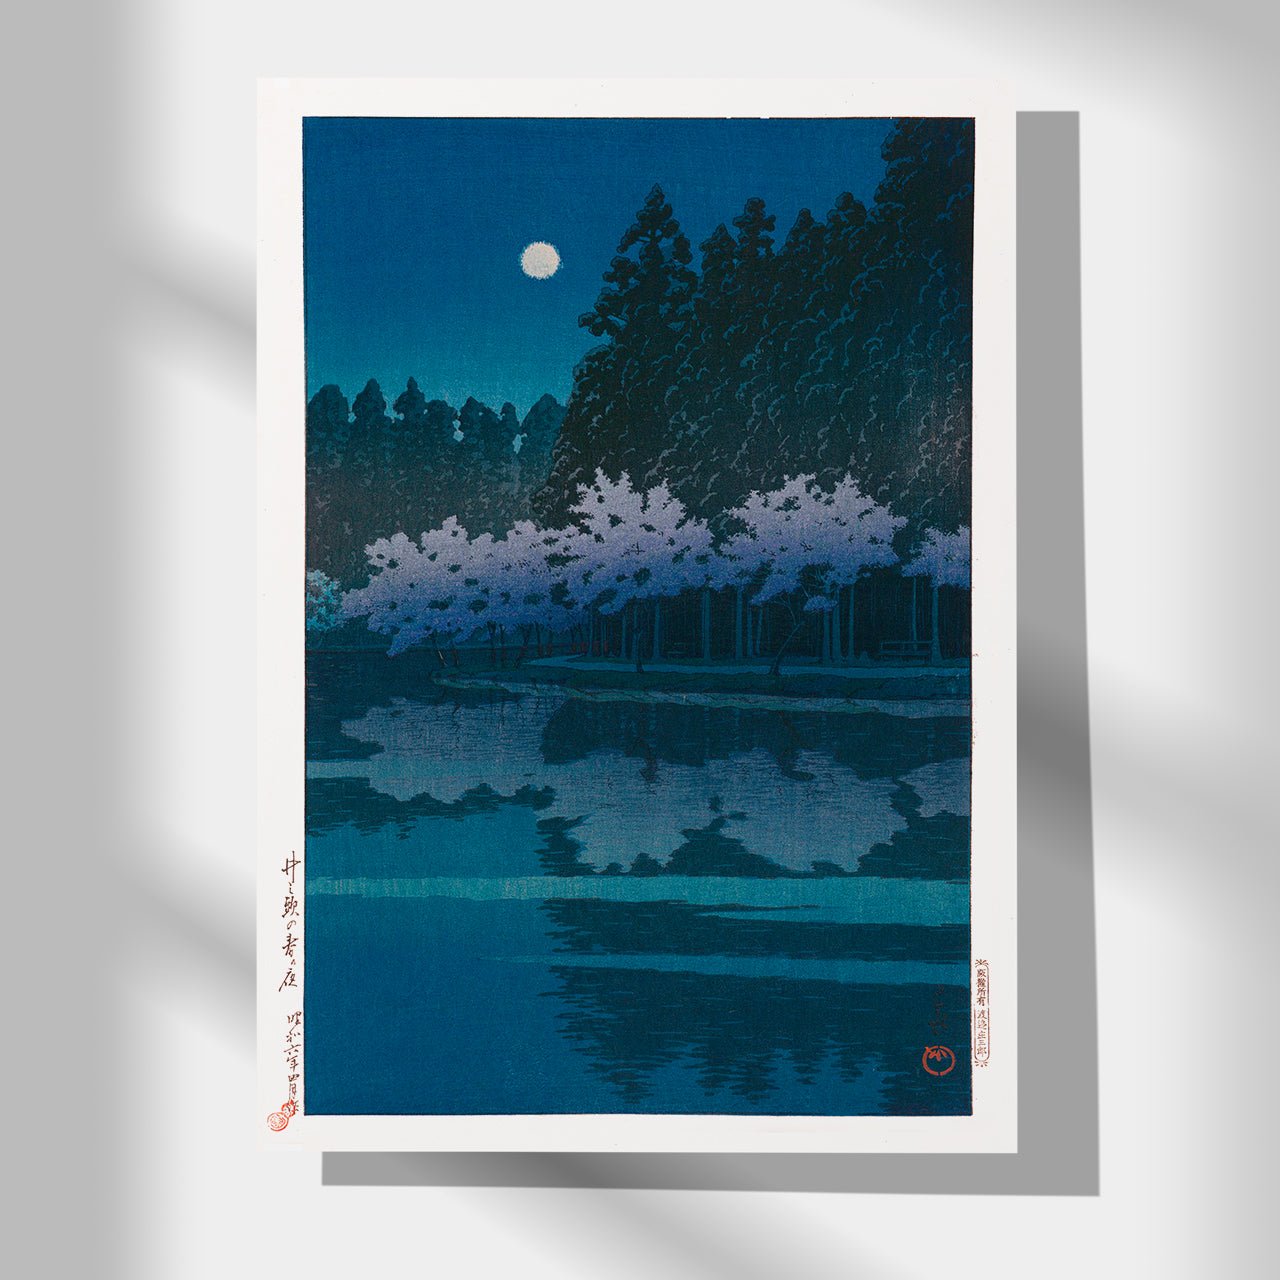 Japanese Art Poster by Kawase Hasui featuring a moonlit lake and Cherry Blossom under a night sky.